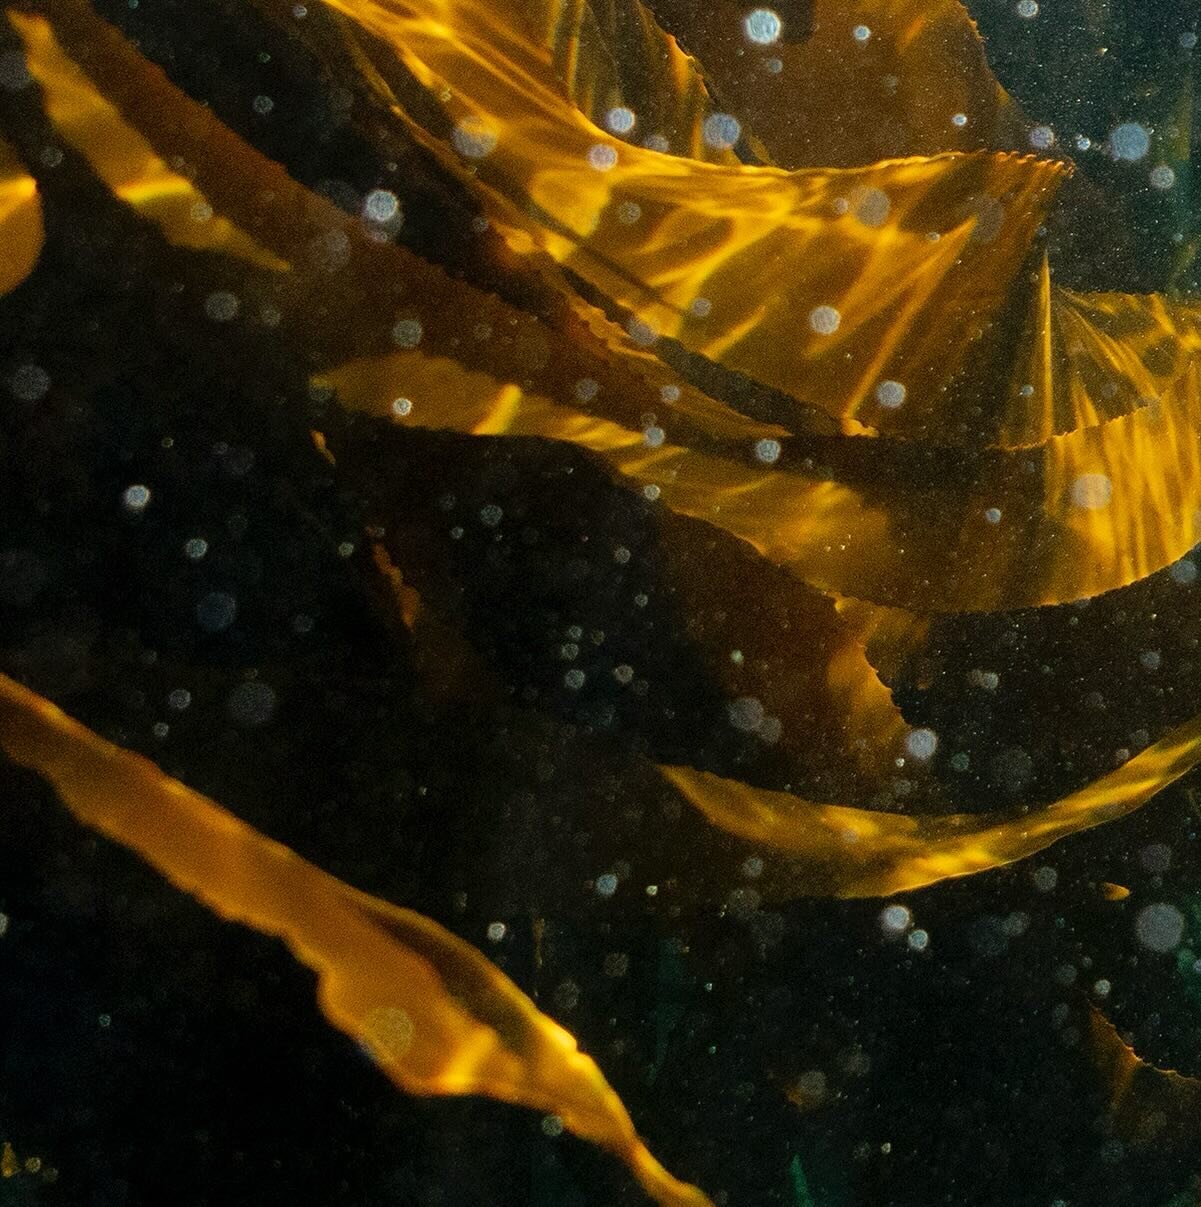 The kelp forest off of Windmill Beach, Simon&rsquo;s Town, South Africa, August 13, 2023. Adriane Ohanesian for the Bulletin of the Atomic Scientists

Kelp forests can grow to a height of 175 feet in some environments and maintain a canopy structure 